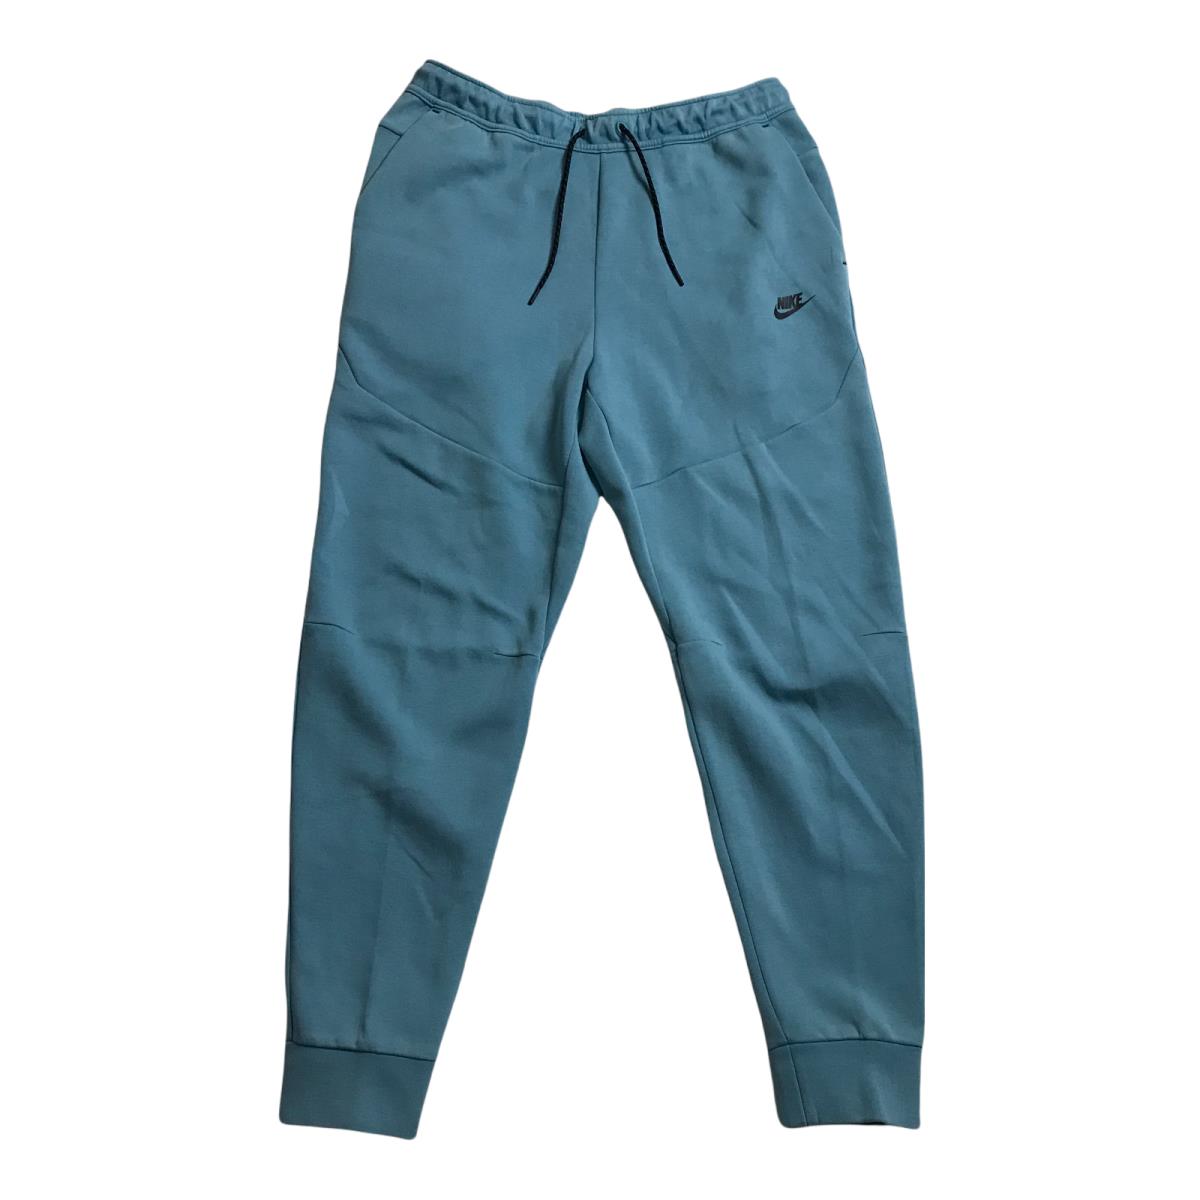 Joggers, Shop best selling Joggers